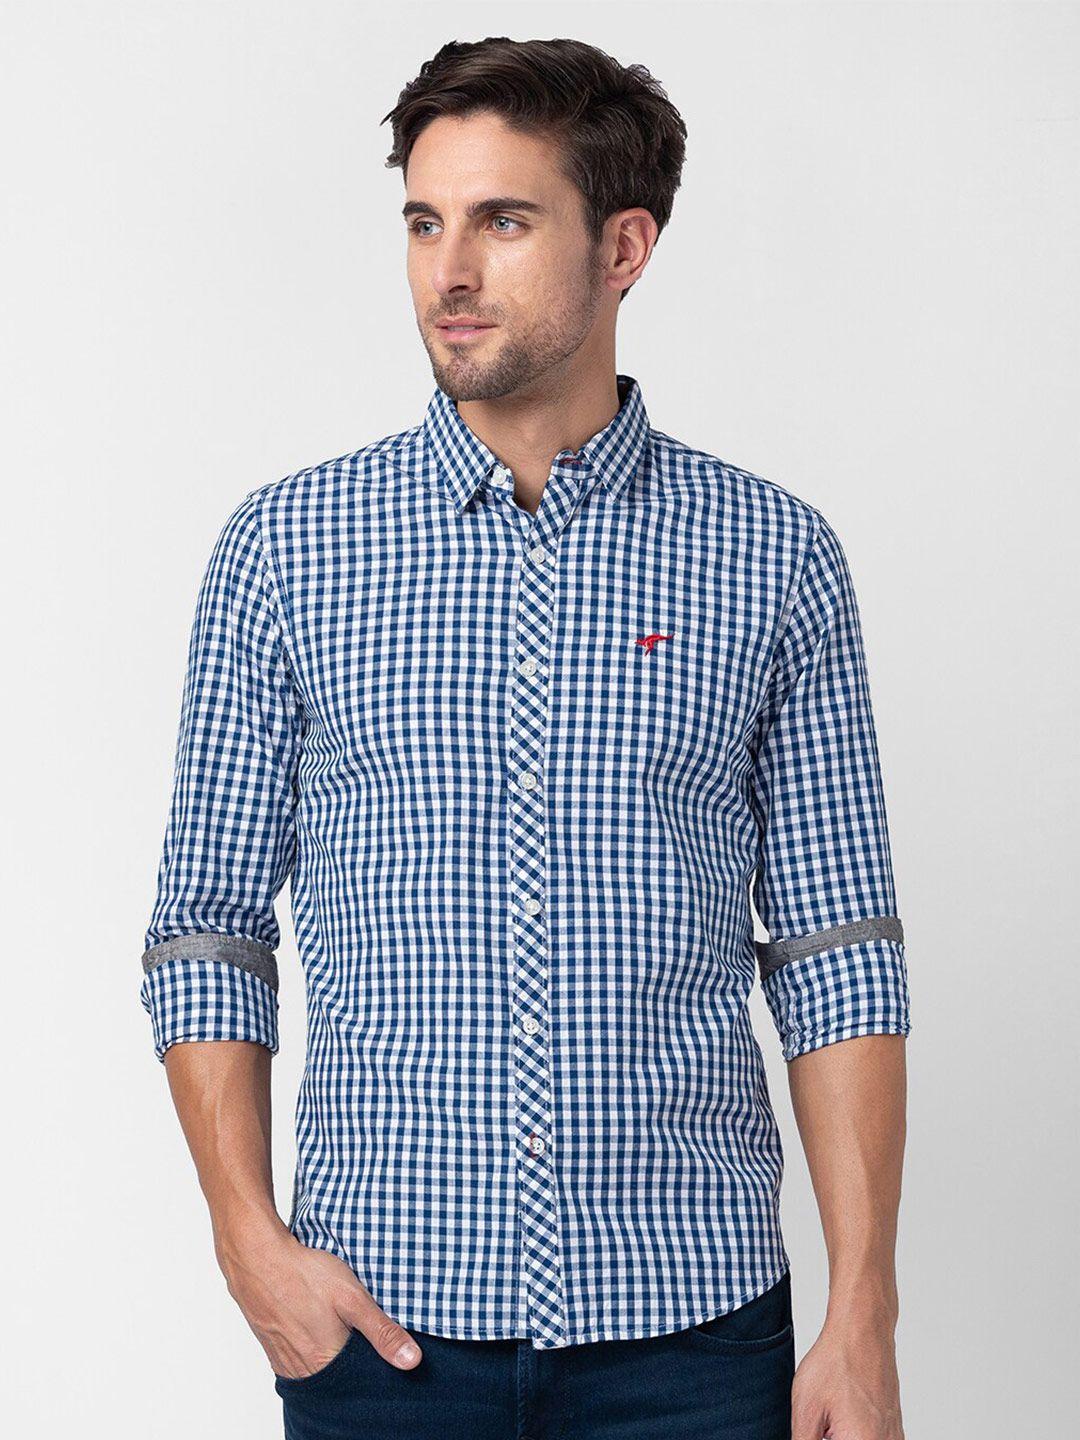 globus blue comfort gingham checked pure cotton casual shirt